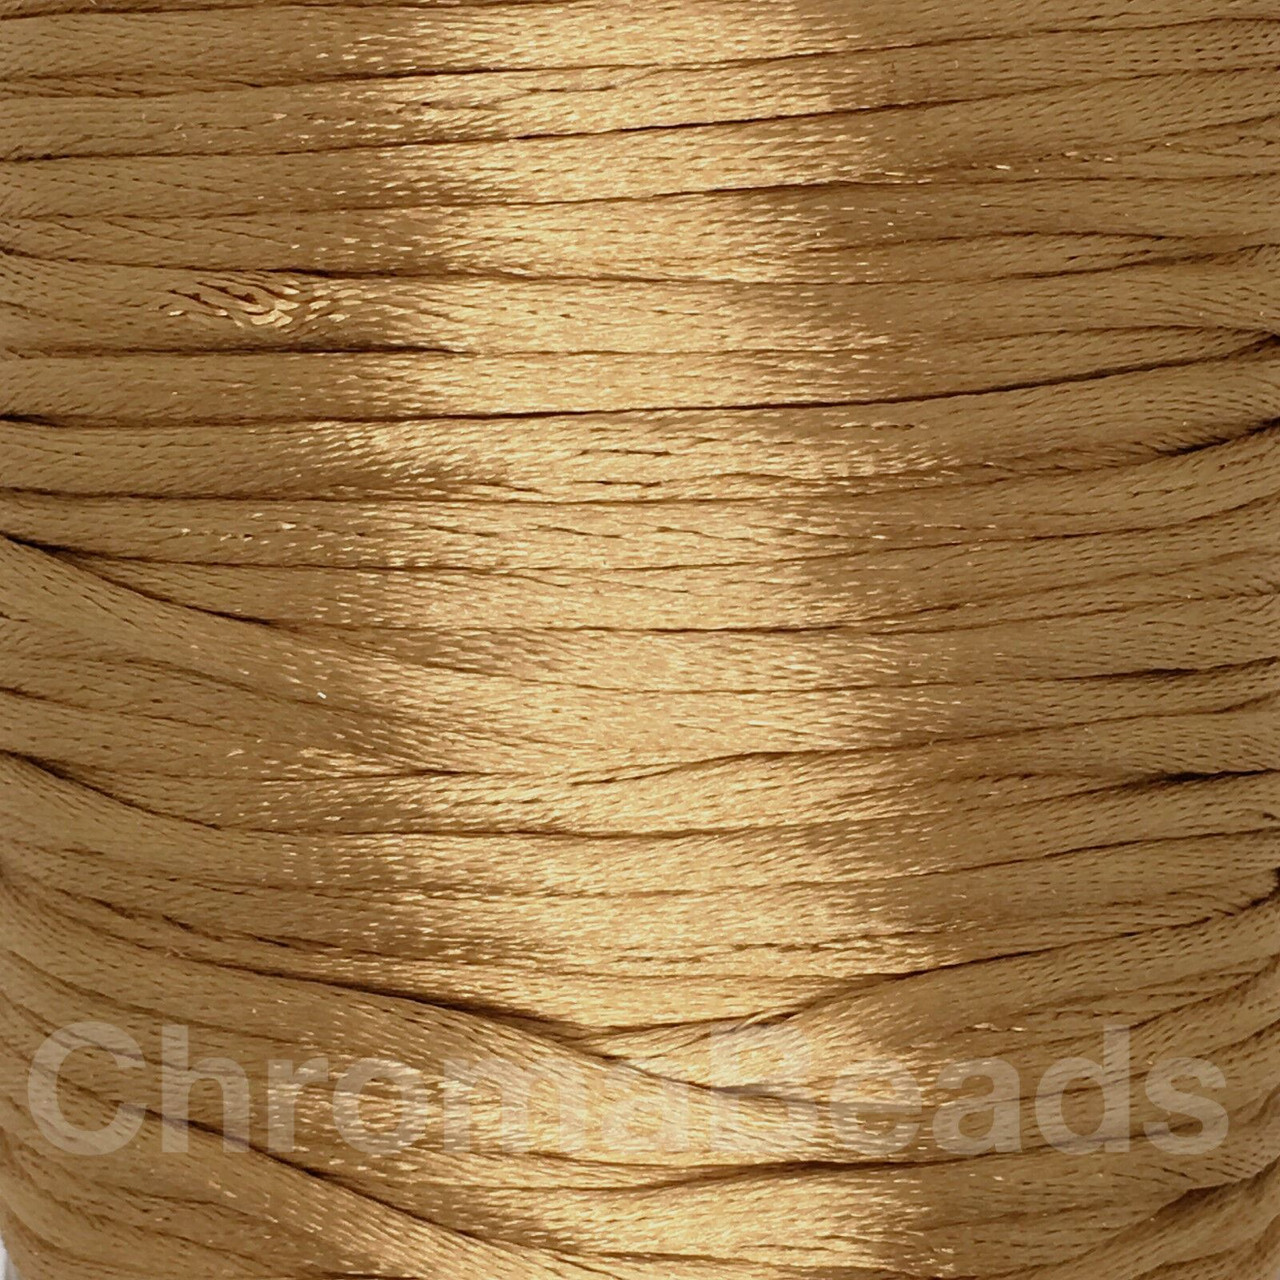 2 Reels of Nylon Cord (Rattail) - Wheat, approx 45m